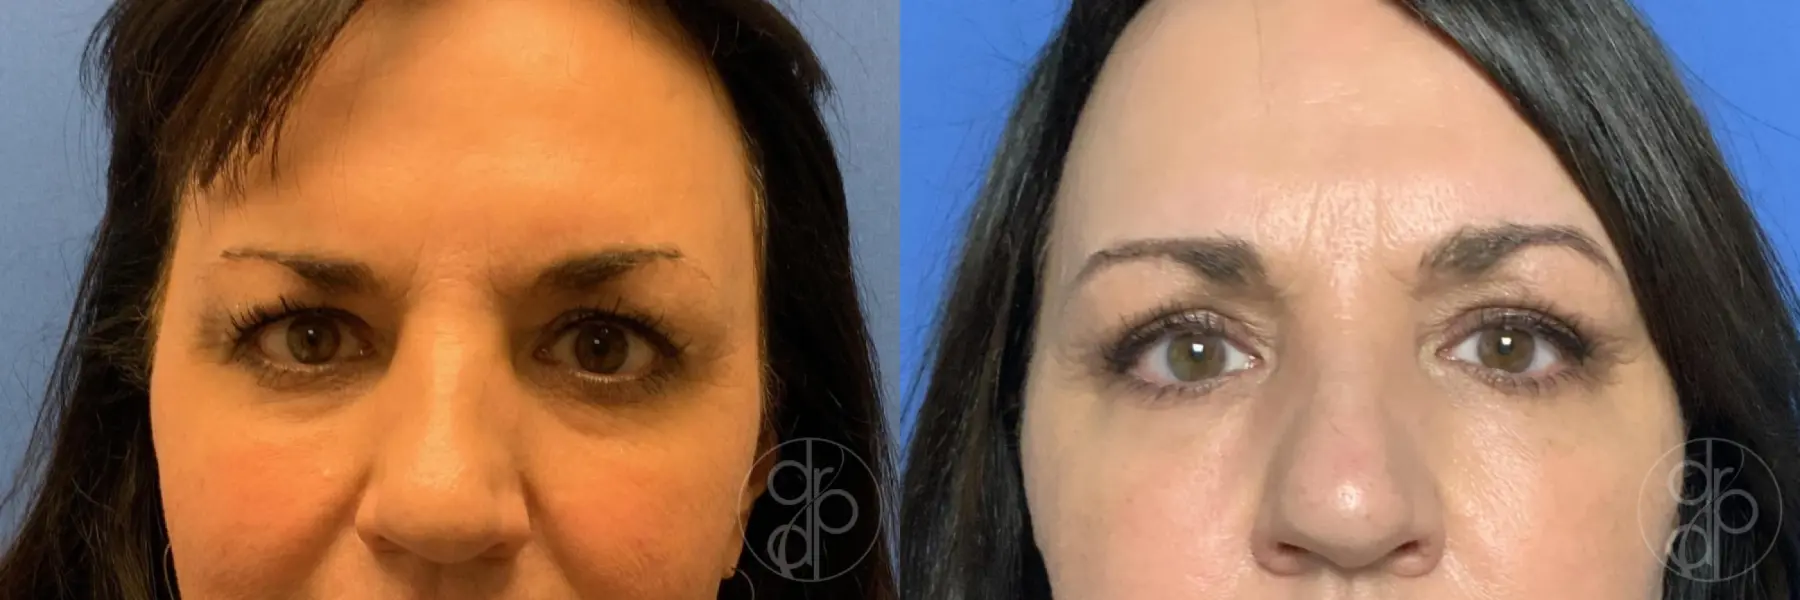 Blepharoplasty: Patient 5 - Before and After  